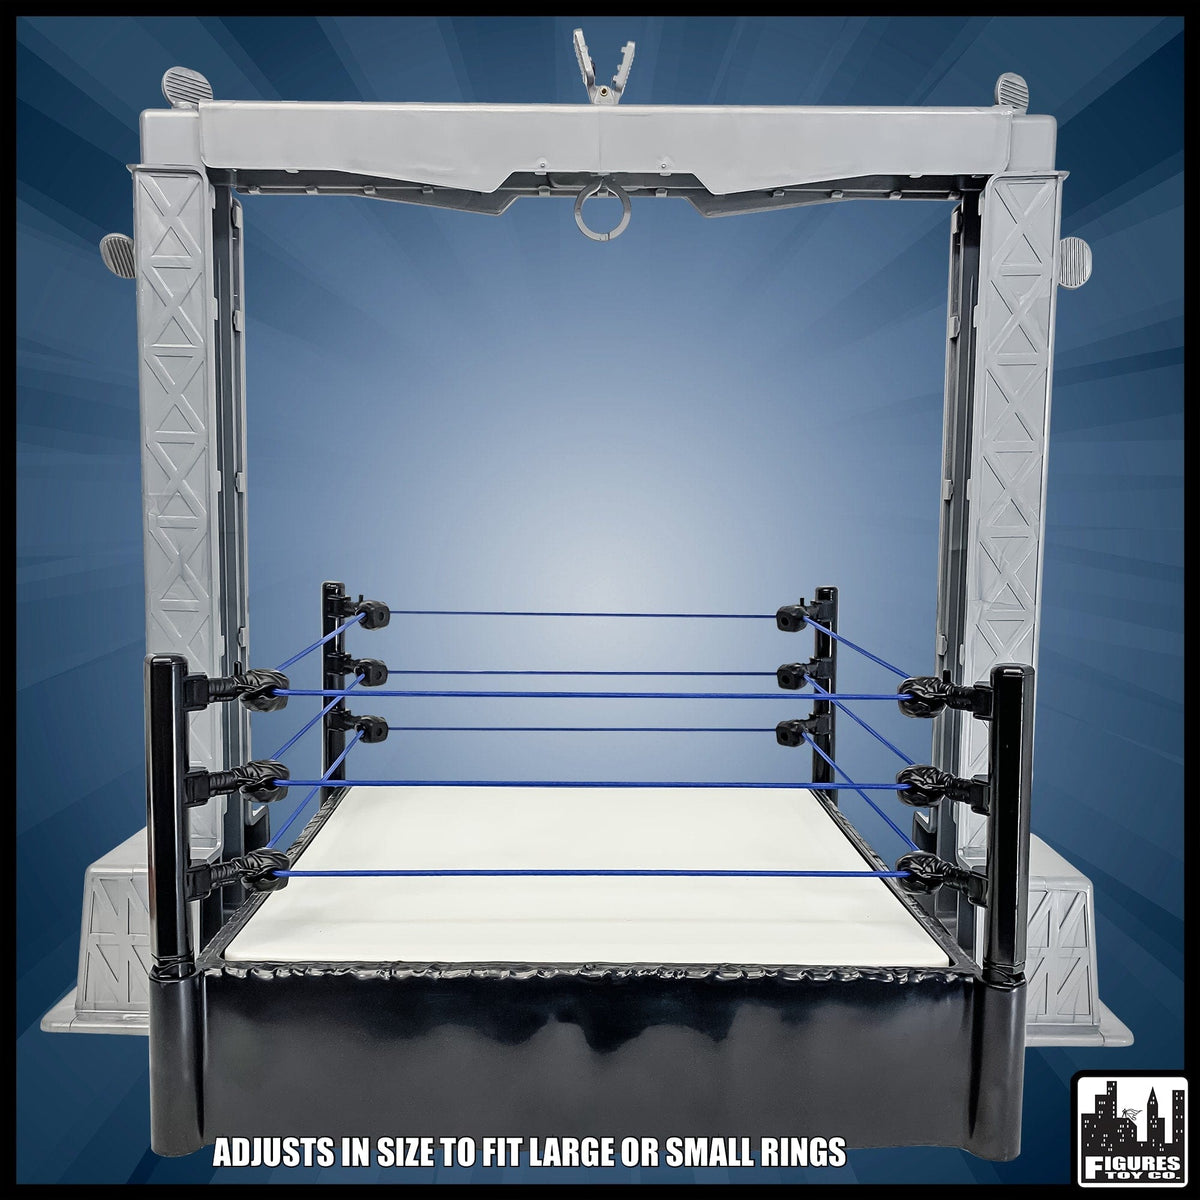 Shark Cage &amp; Grab The Gear Playset for WWE Wrestling Action Figures